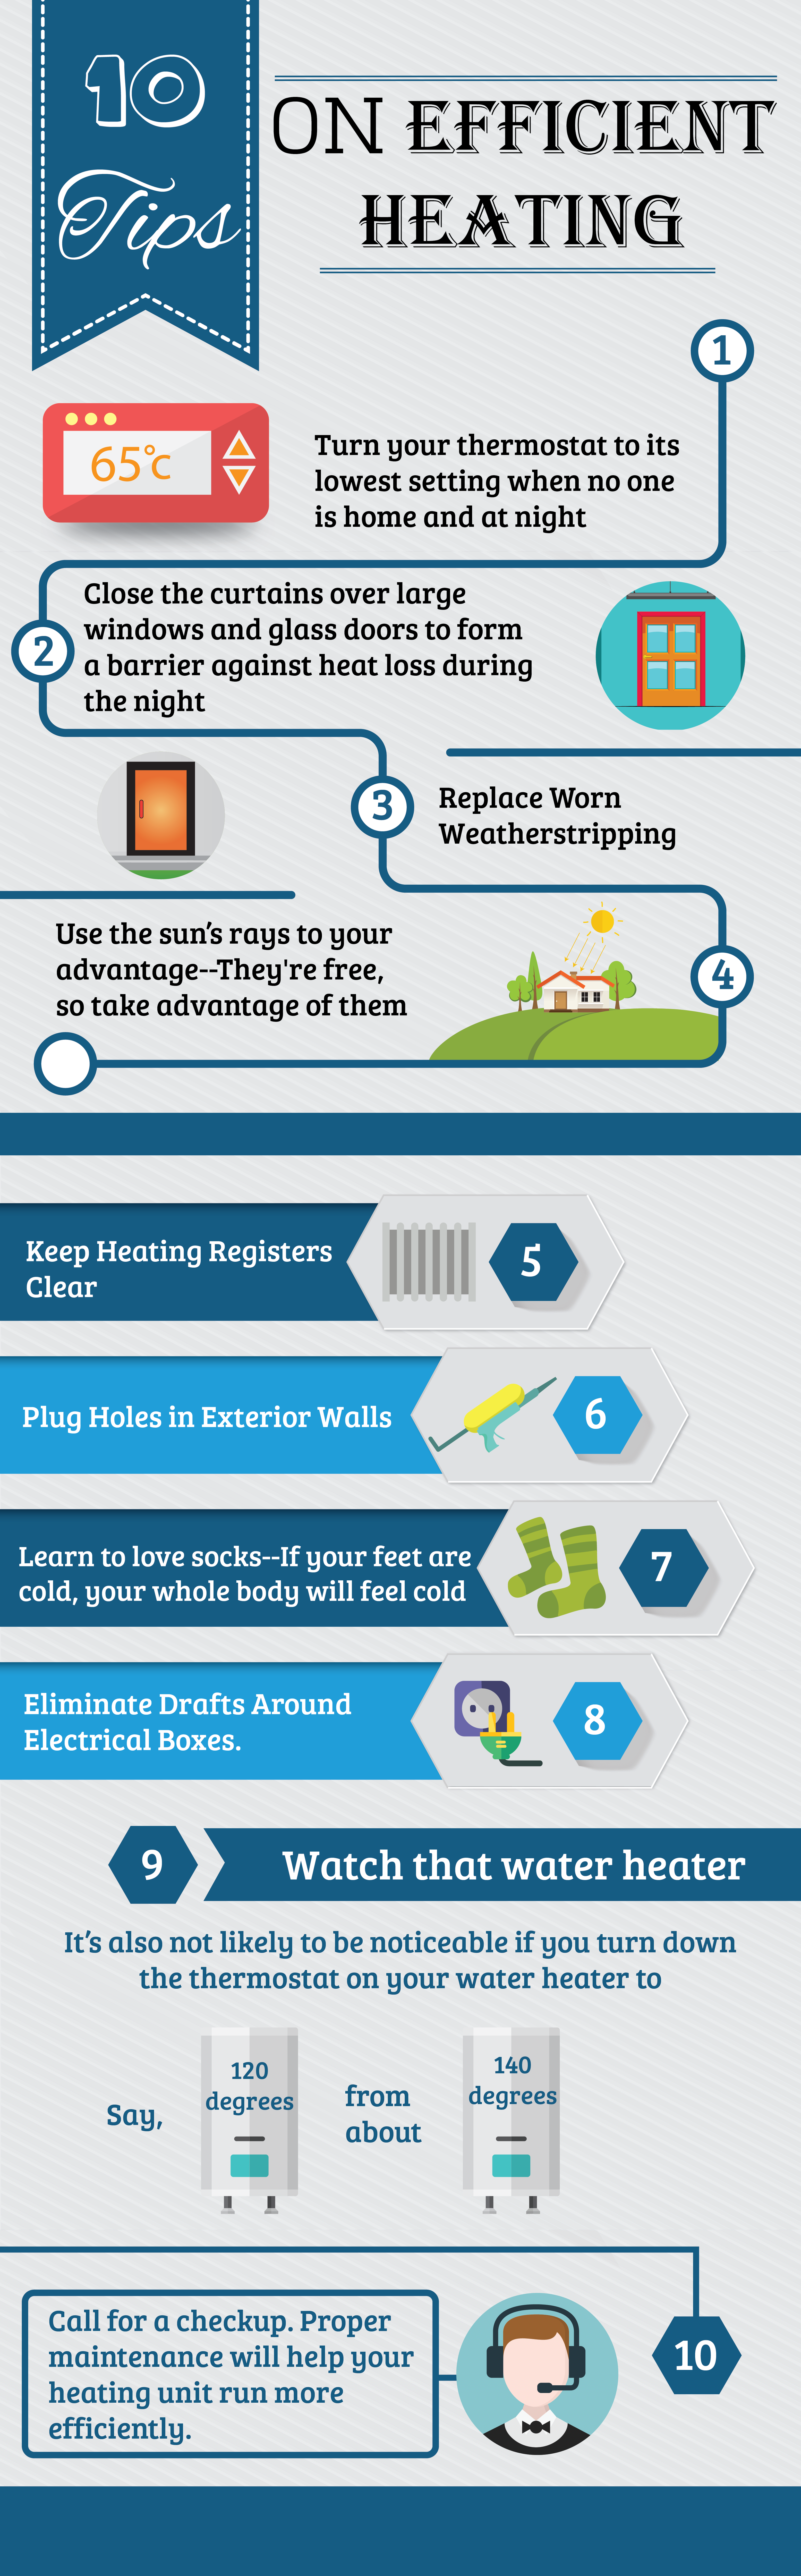 Tips on Efficient Heating.png